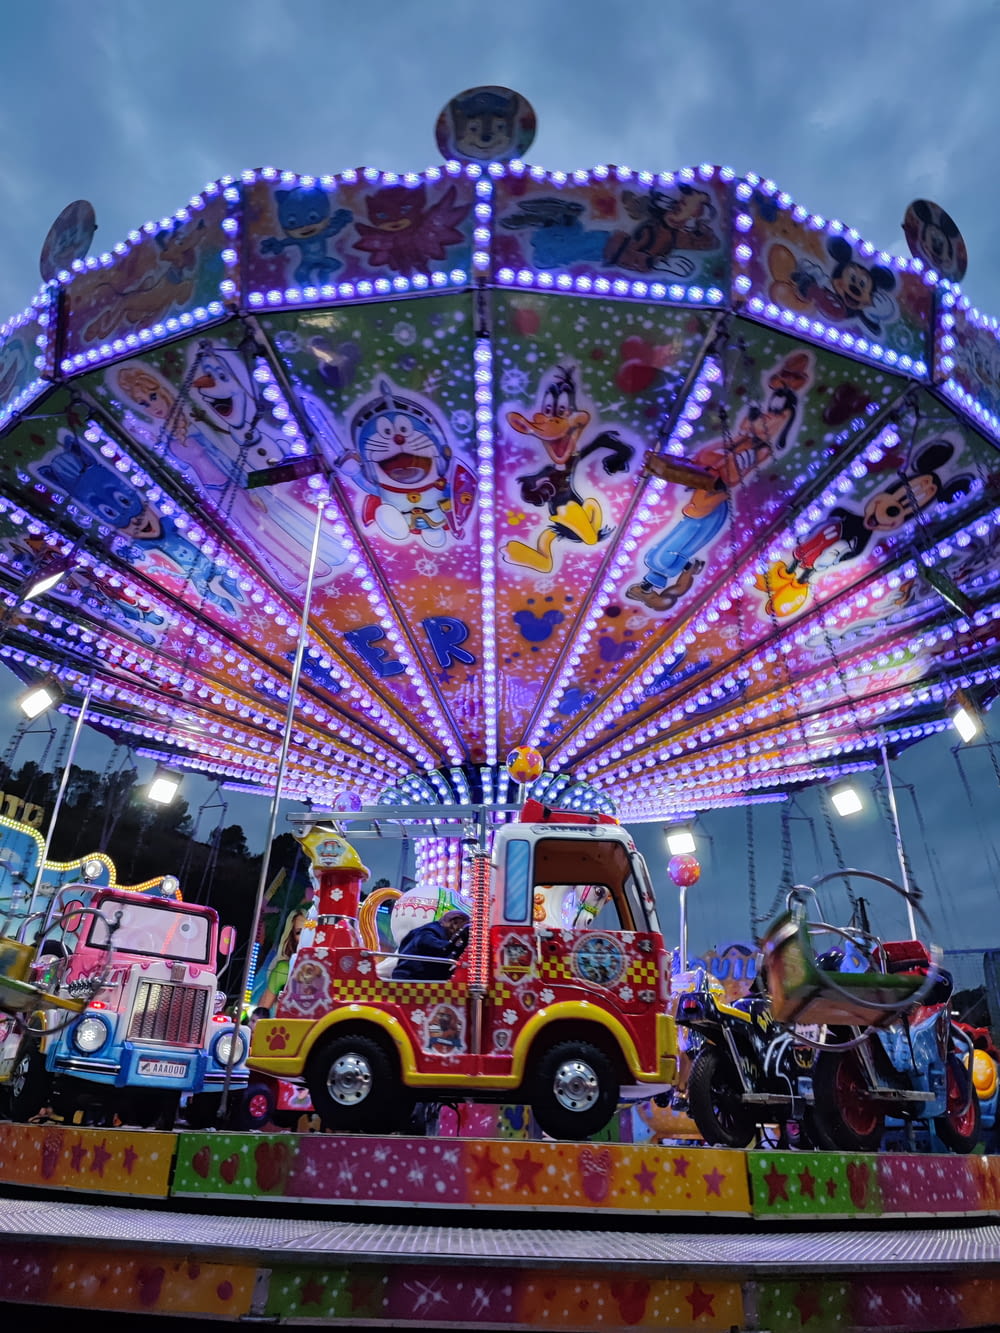 a brightly lit carnival ride with a colorful car